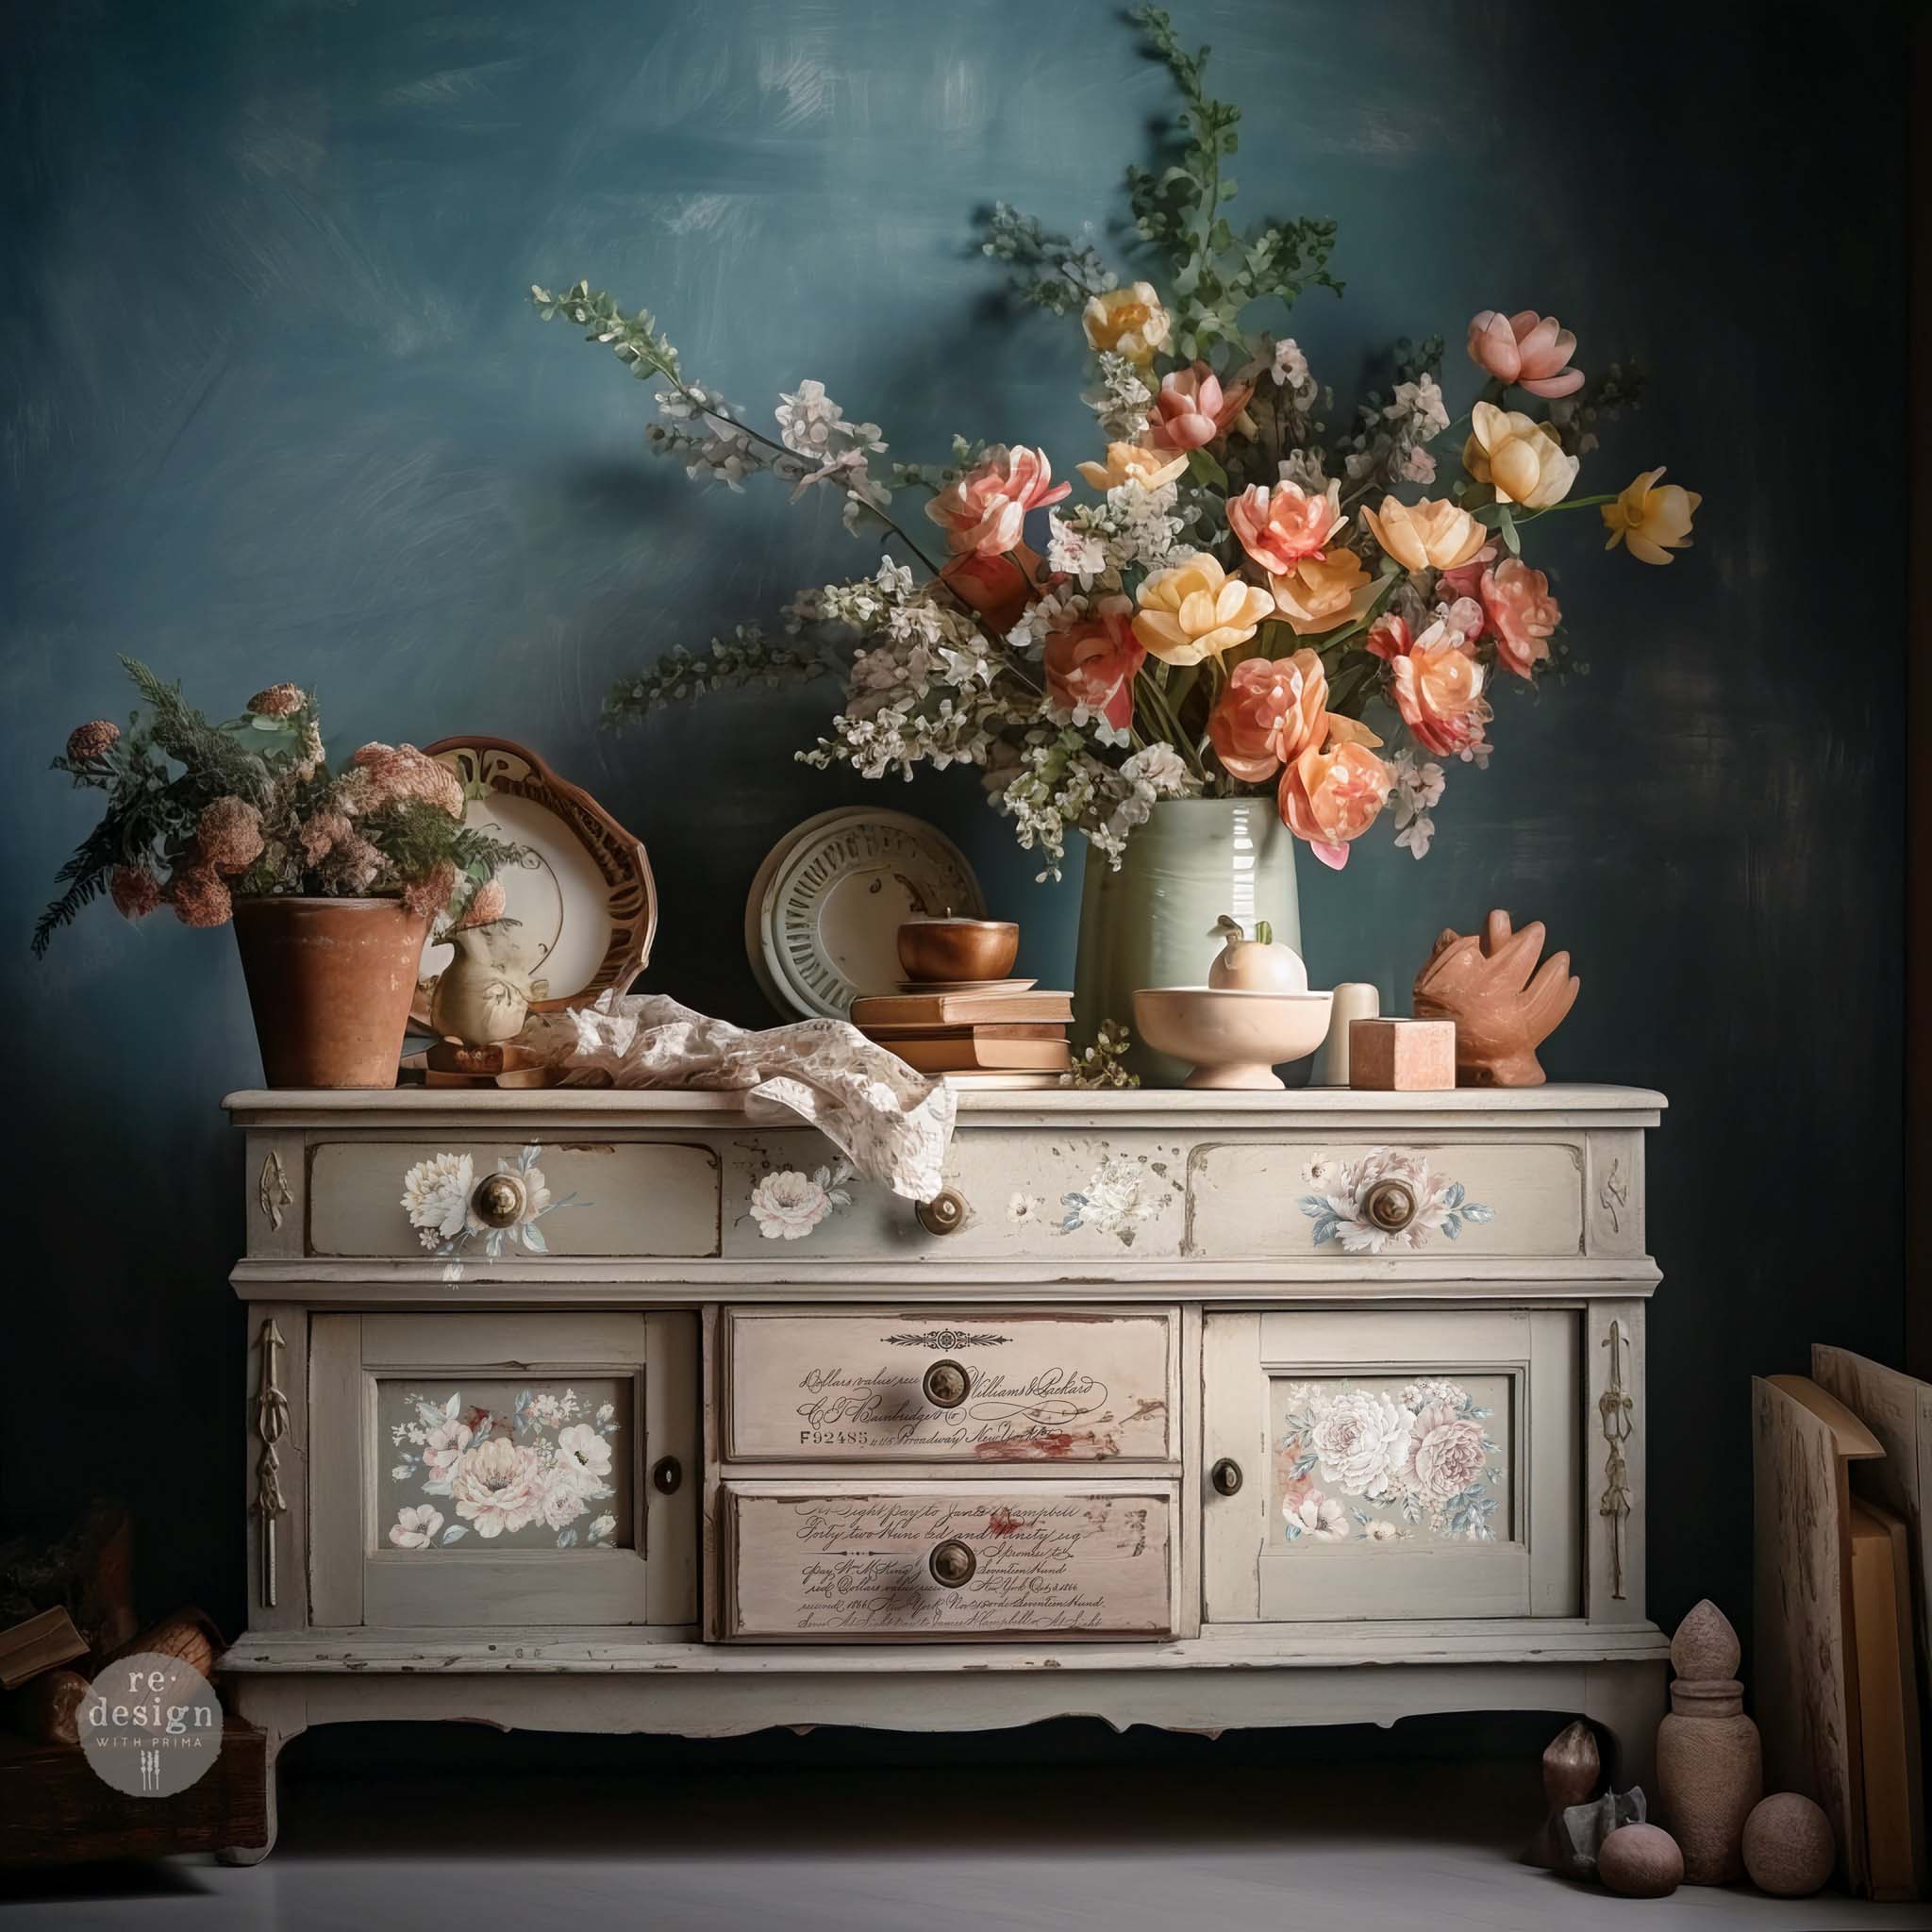 A vintage console table is painted light beige and features ReDesign with Prima's Natural Wonders small transfer on the front. Vases of coral and pale yellow floral bouquets and other items sit on the table.